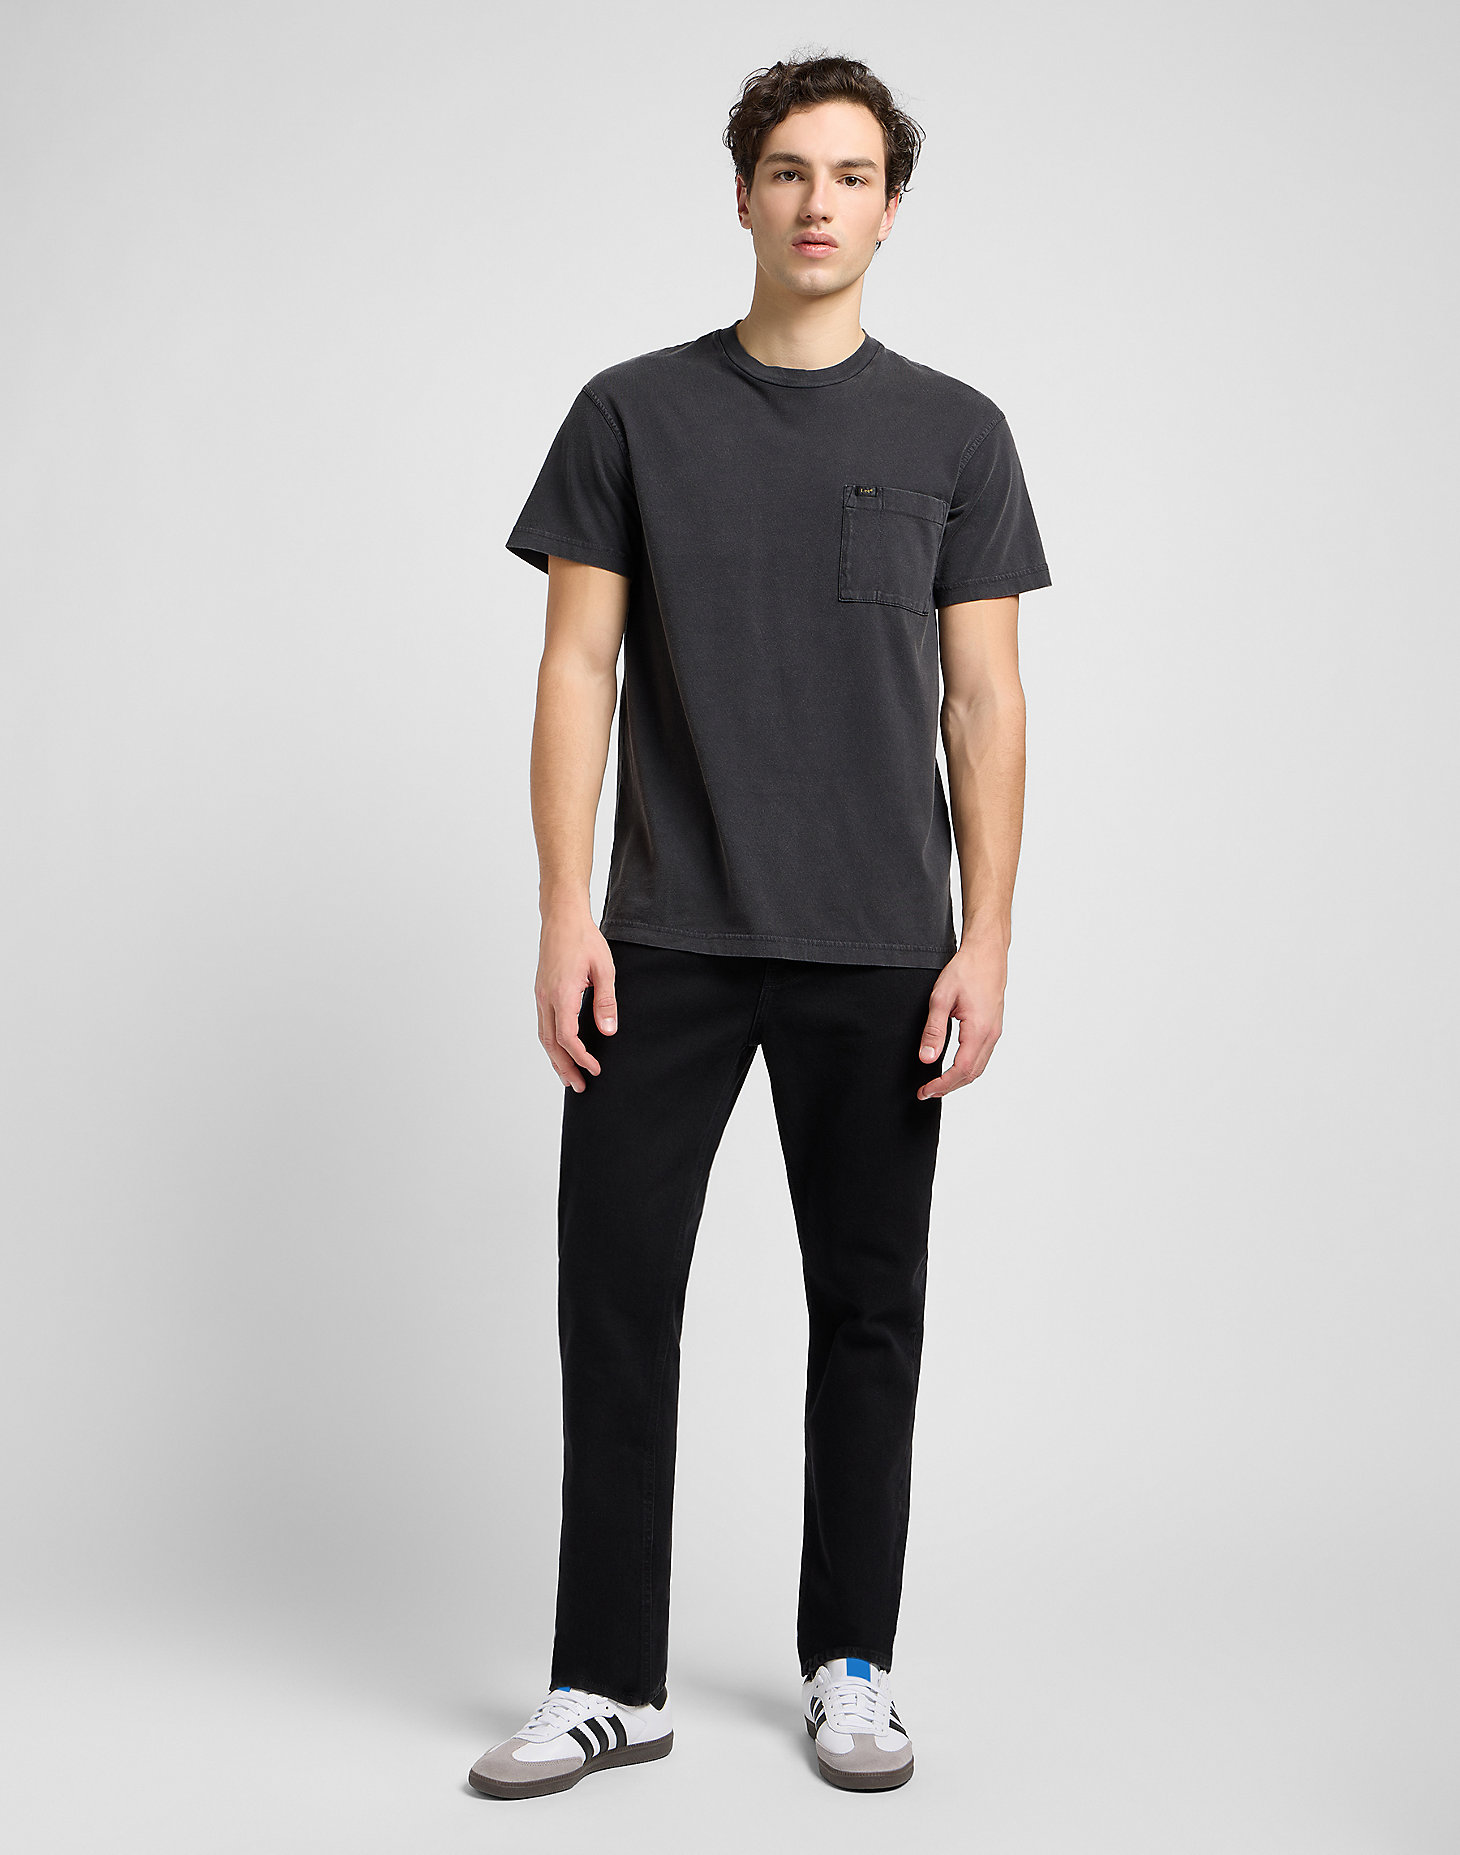 Relaxed Pocket Tee in Washed Black alternative view 2